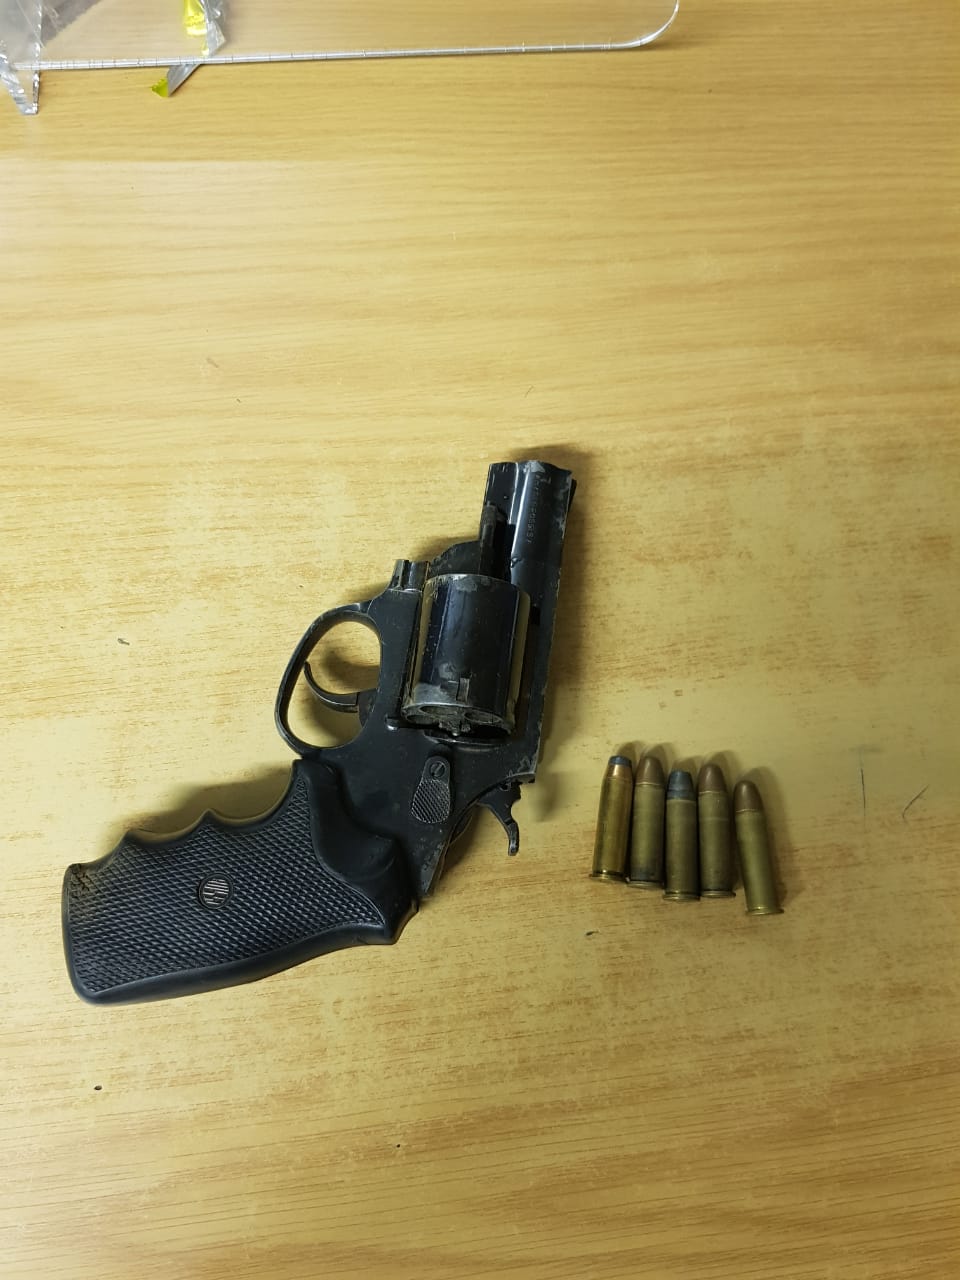 Police apprehend suspect for possession of unlicensed firearm and ammunition